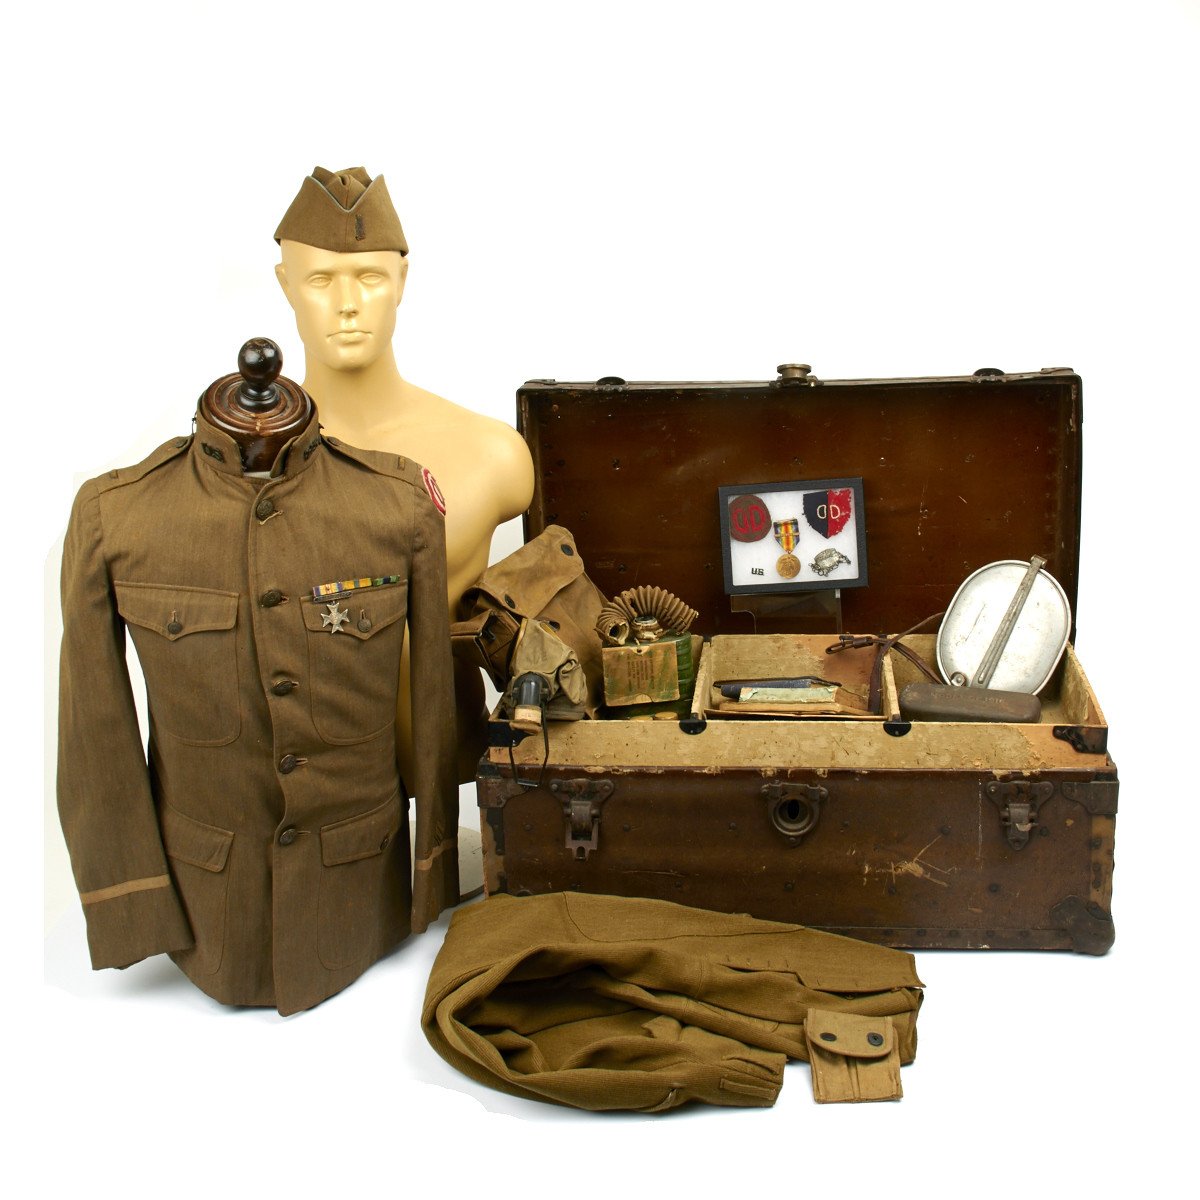 World War I: Footlocker's Contents Reveal Soldier's Story